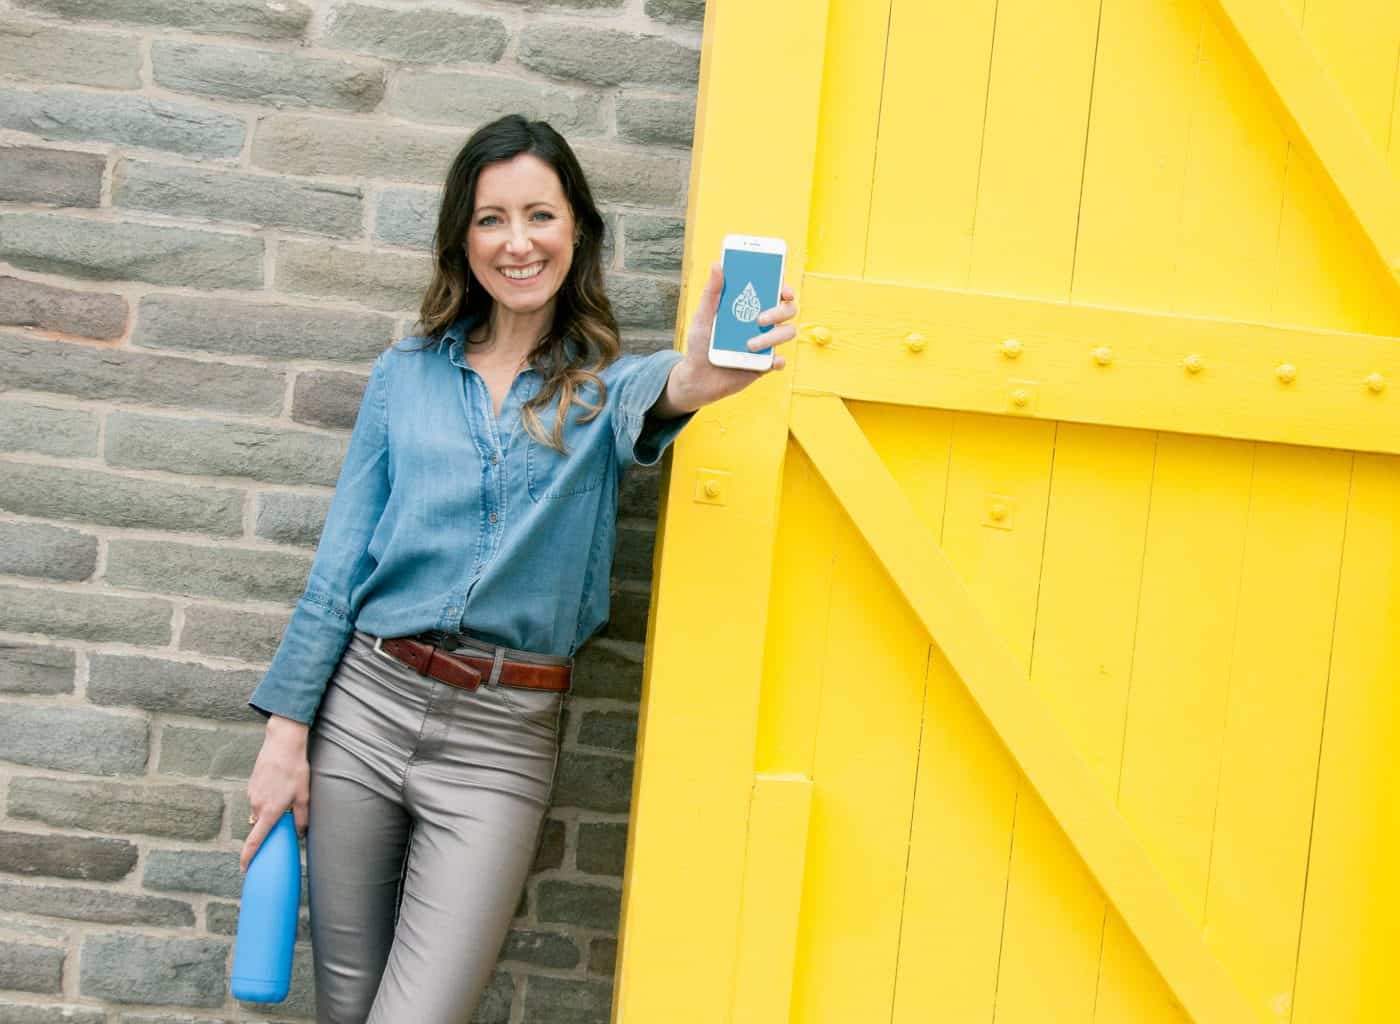 Women holding a cell phone in front of yellow door to celebrate Diags Shift app launch for job seekers